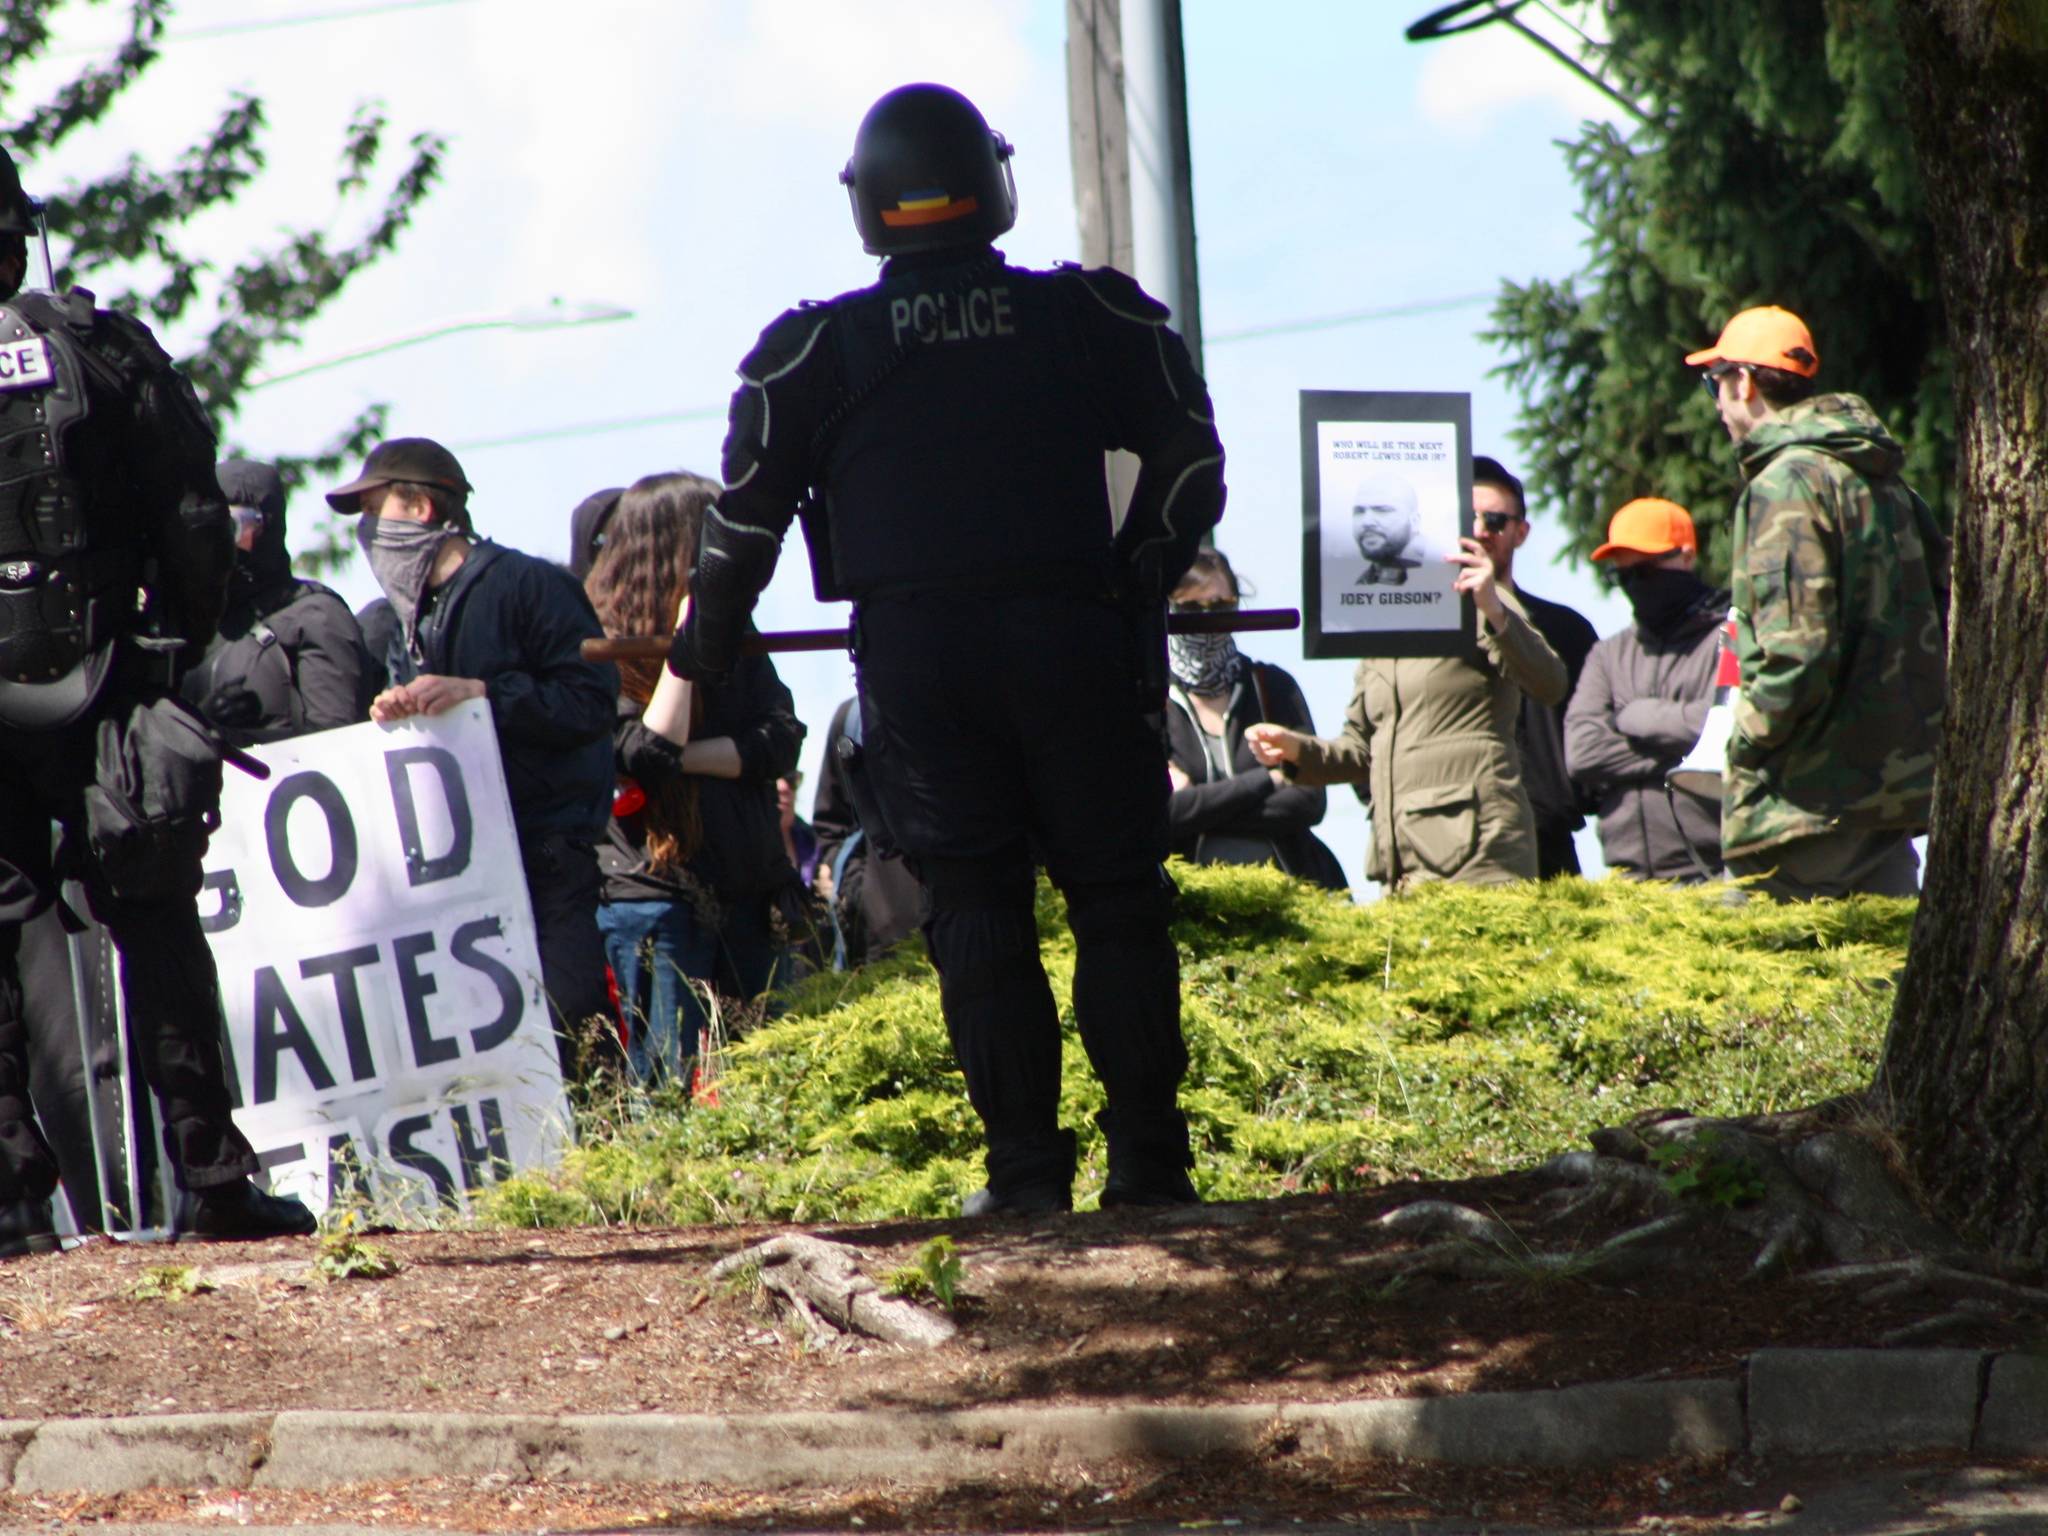 Riot-prepared police keep watch on an anti-fascist group, keeping protesters from engaging the Patriot Prayer, pro-life gathering at a demonstration Saturday outside the Planned Parenthood – Kent Valley Health Center. MARK KLAAS, Kent Reporter